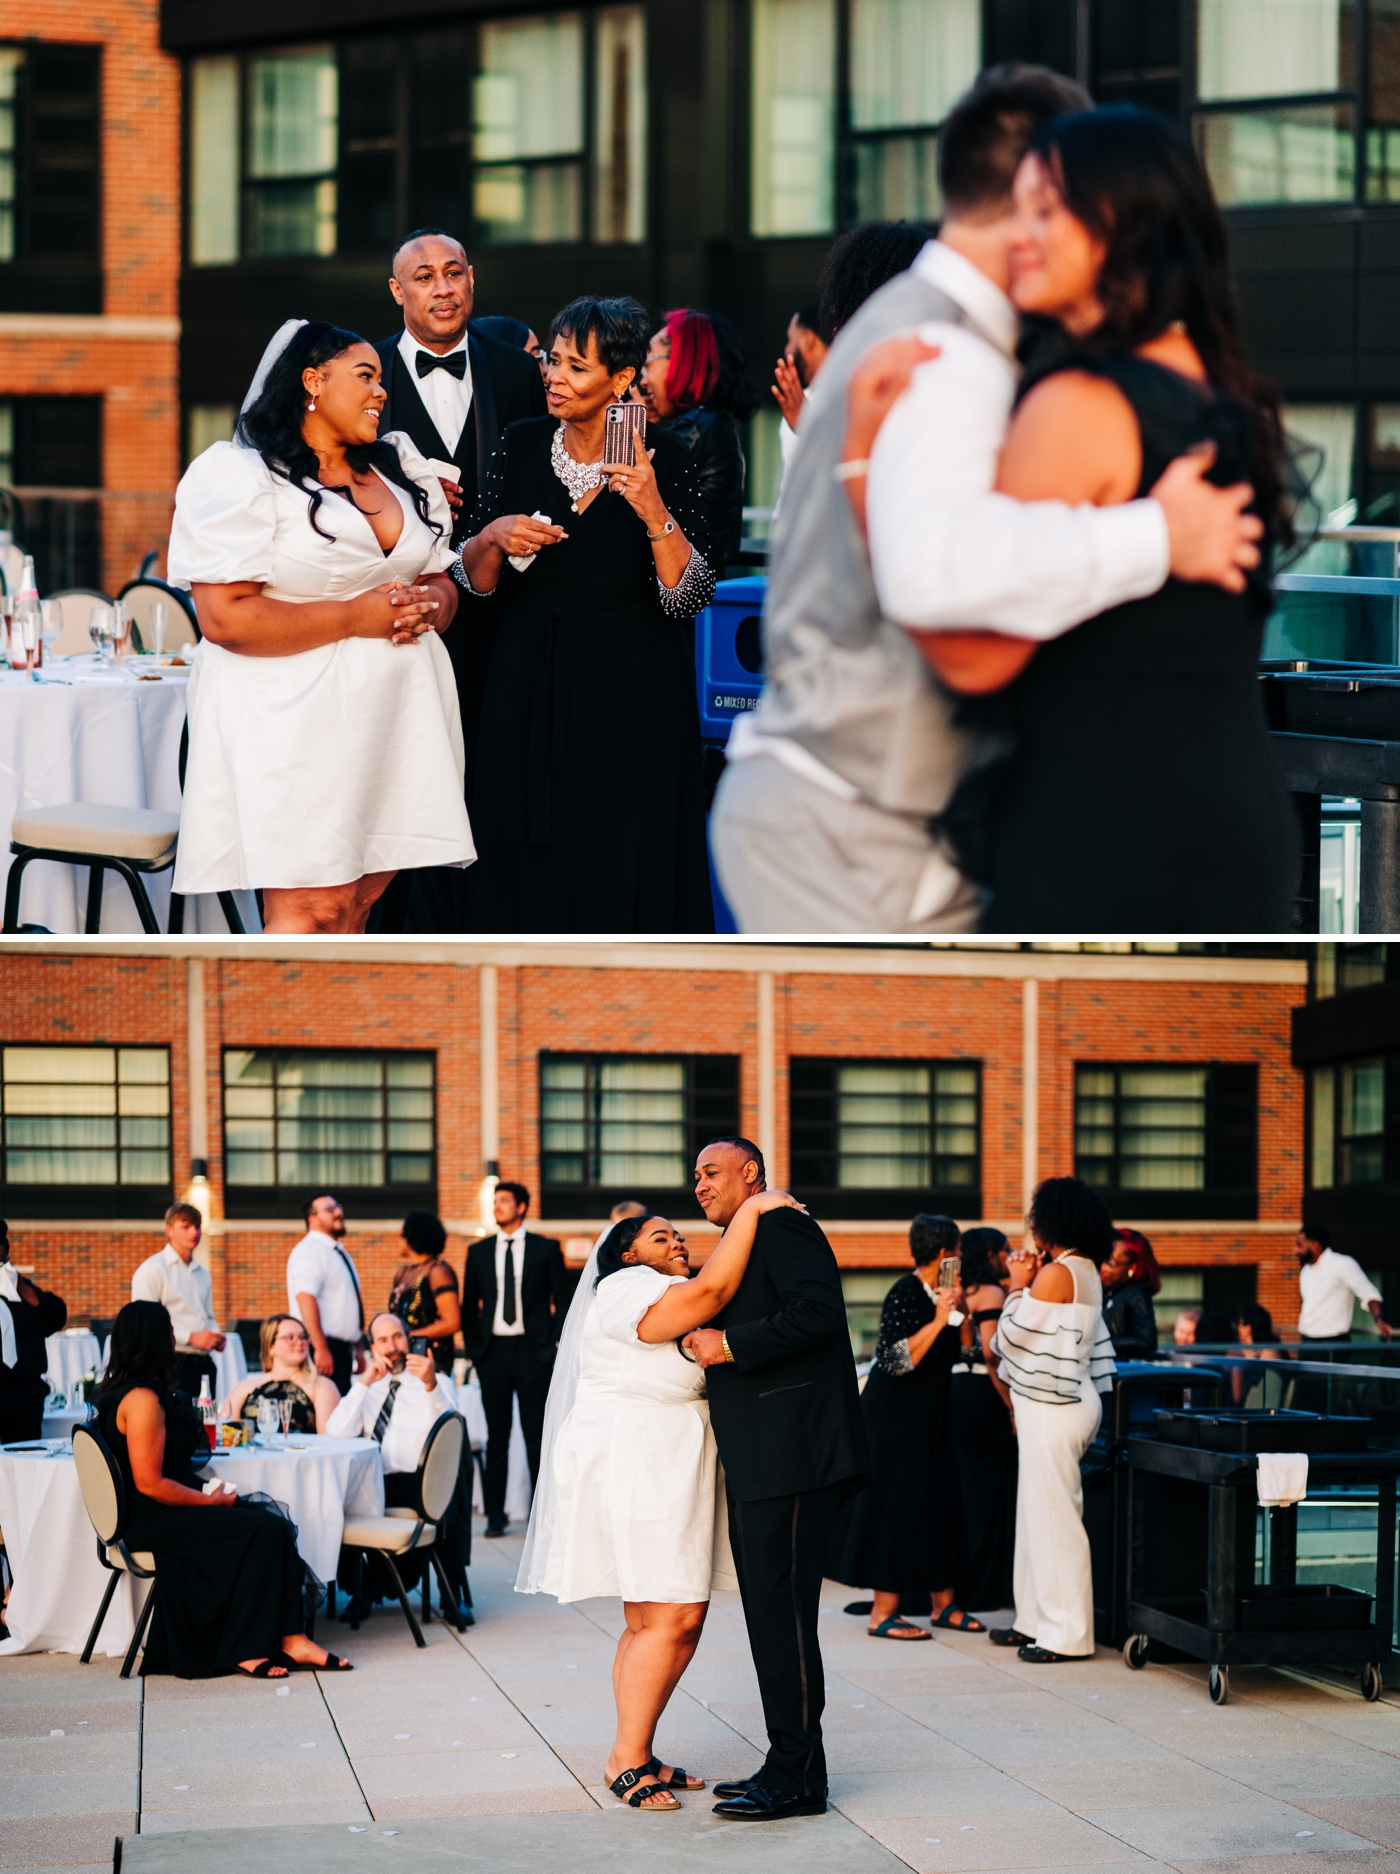 First dances with bride and groom at The Graduate